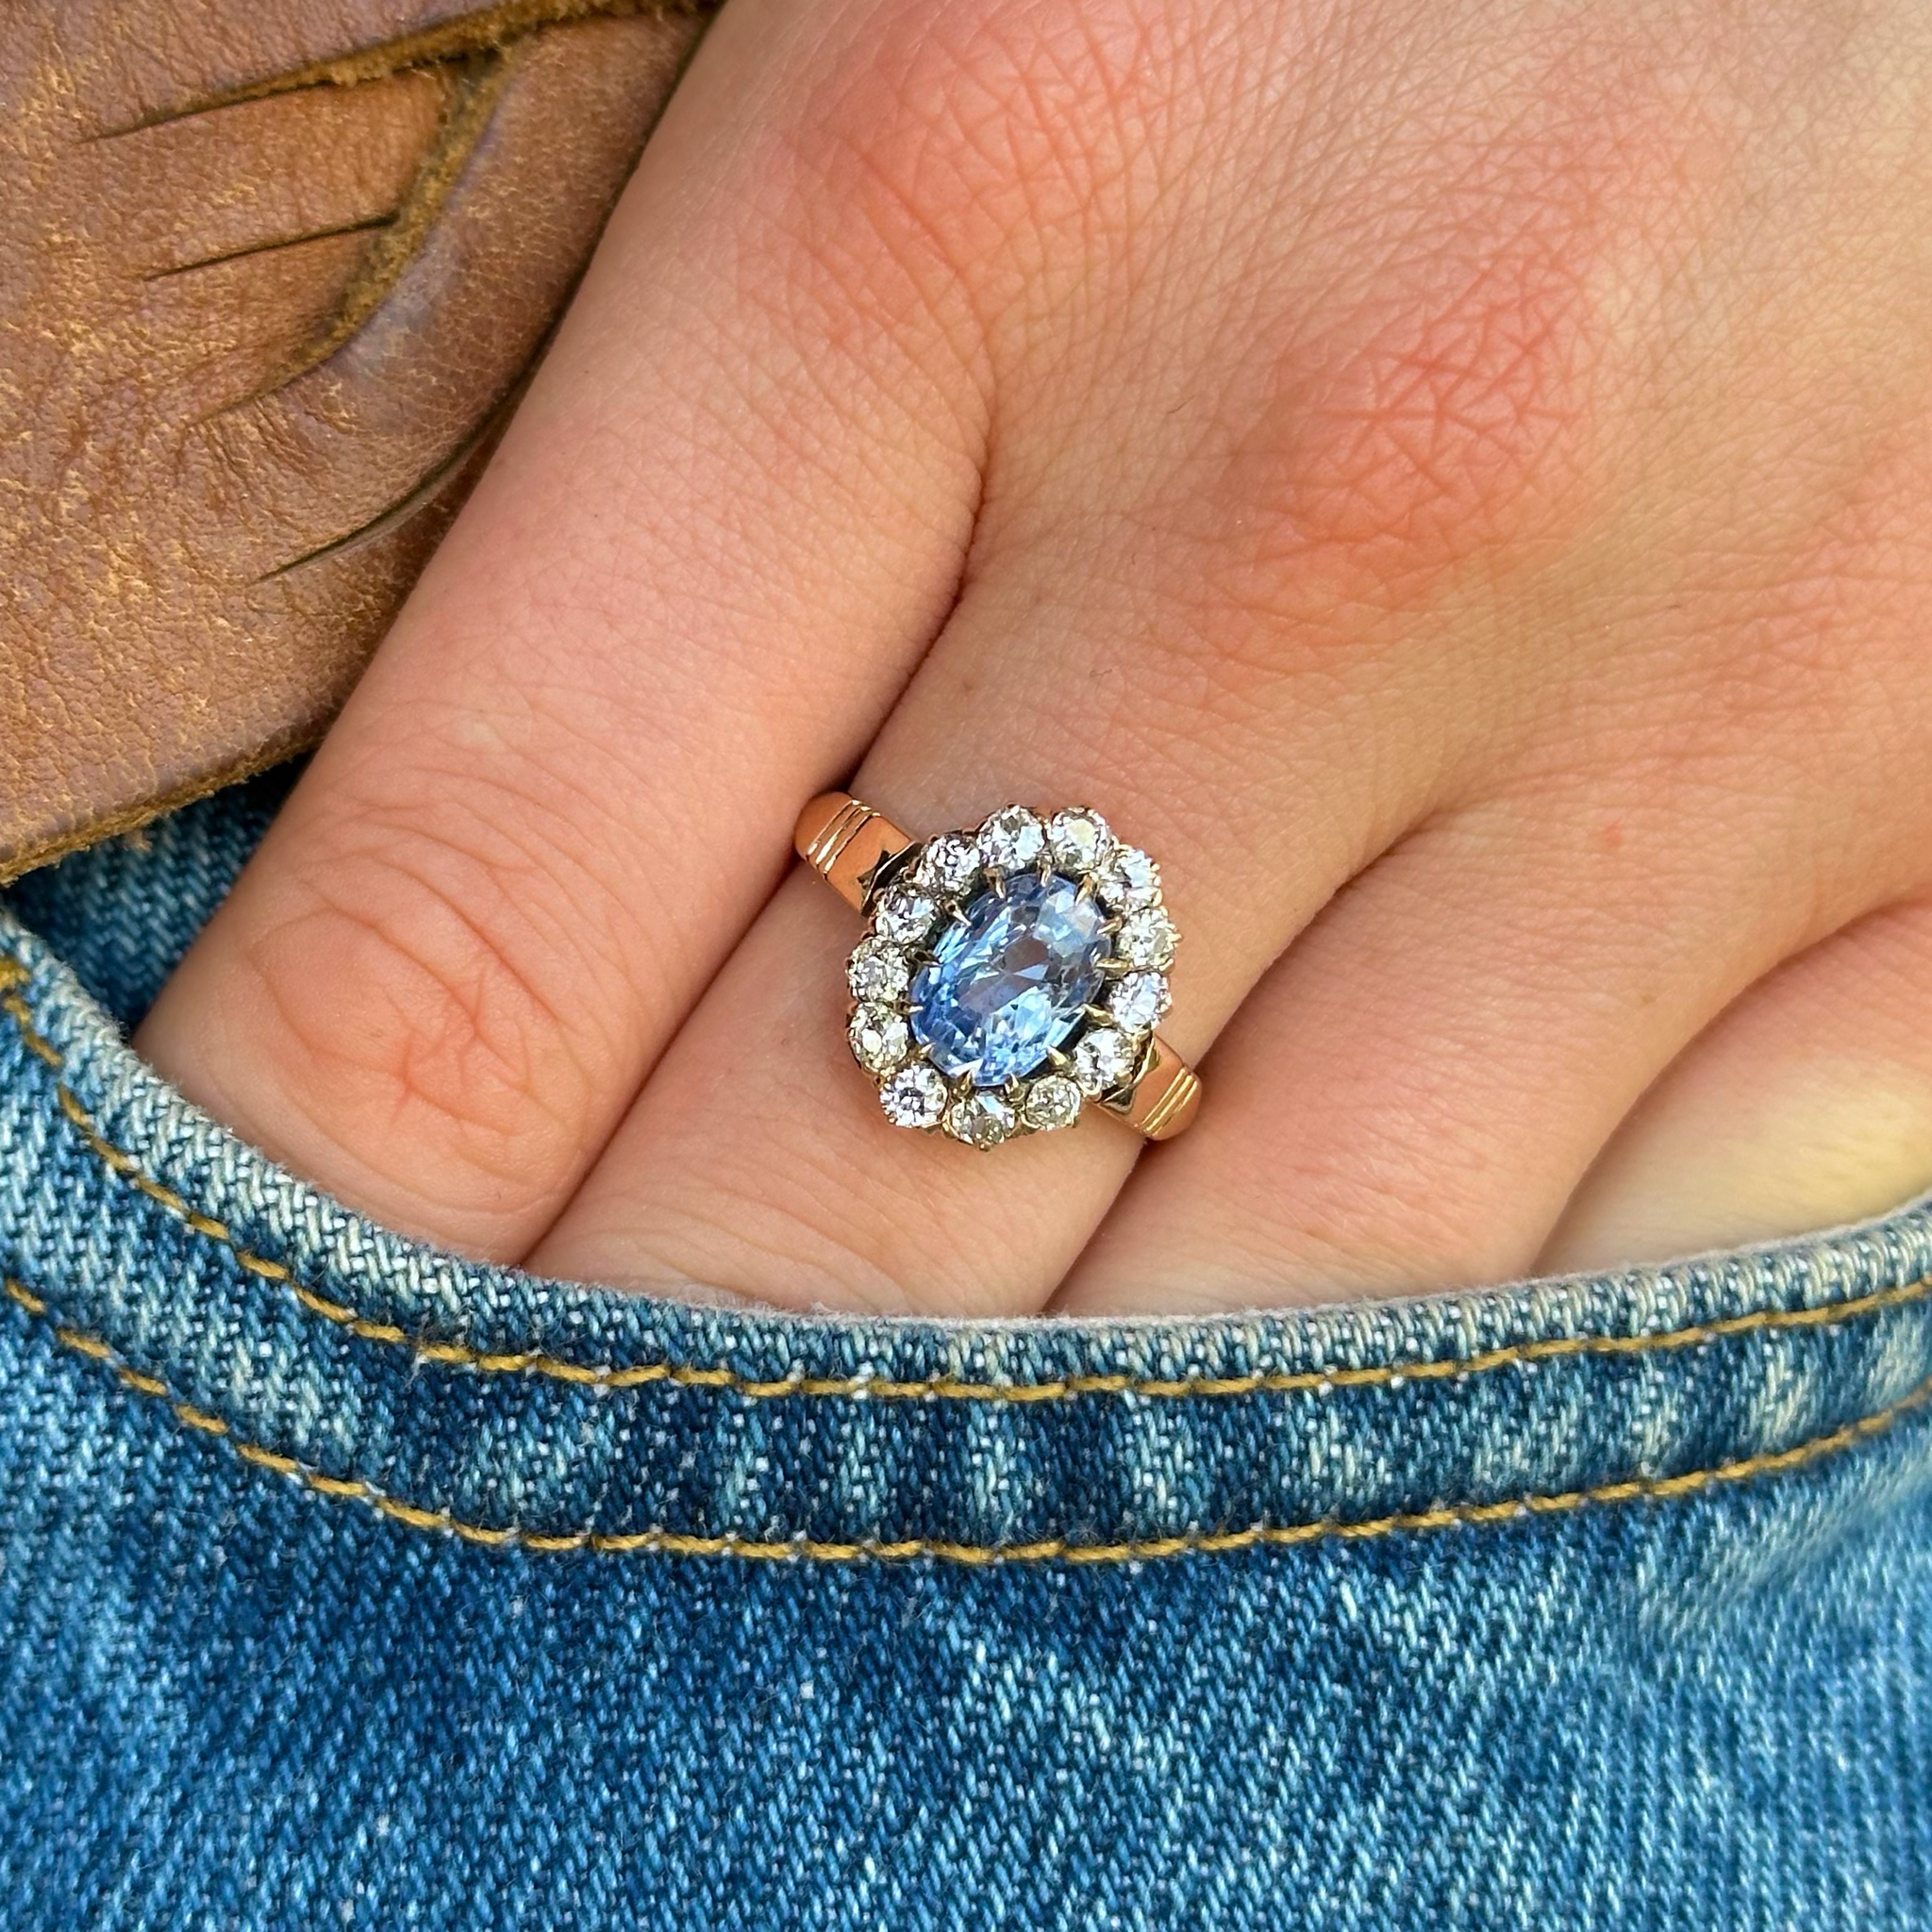 Antique sapphire and diamond ring, worn on hand in pocket of jeans.